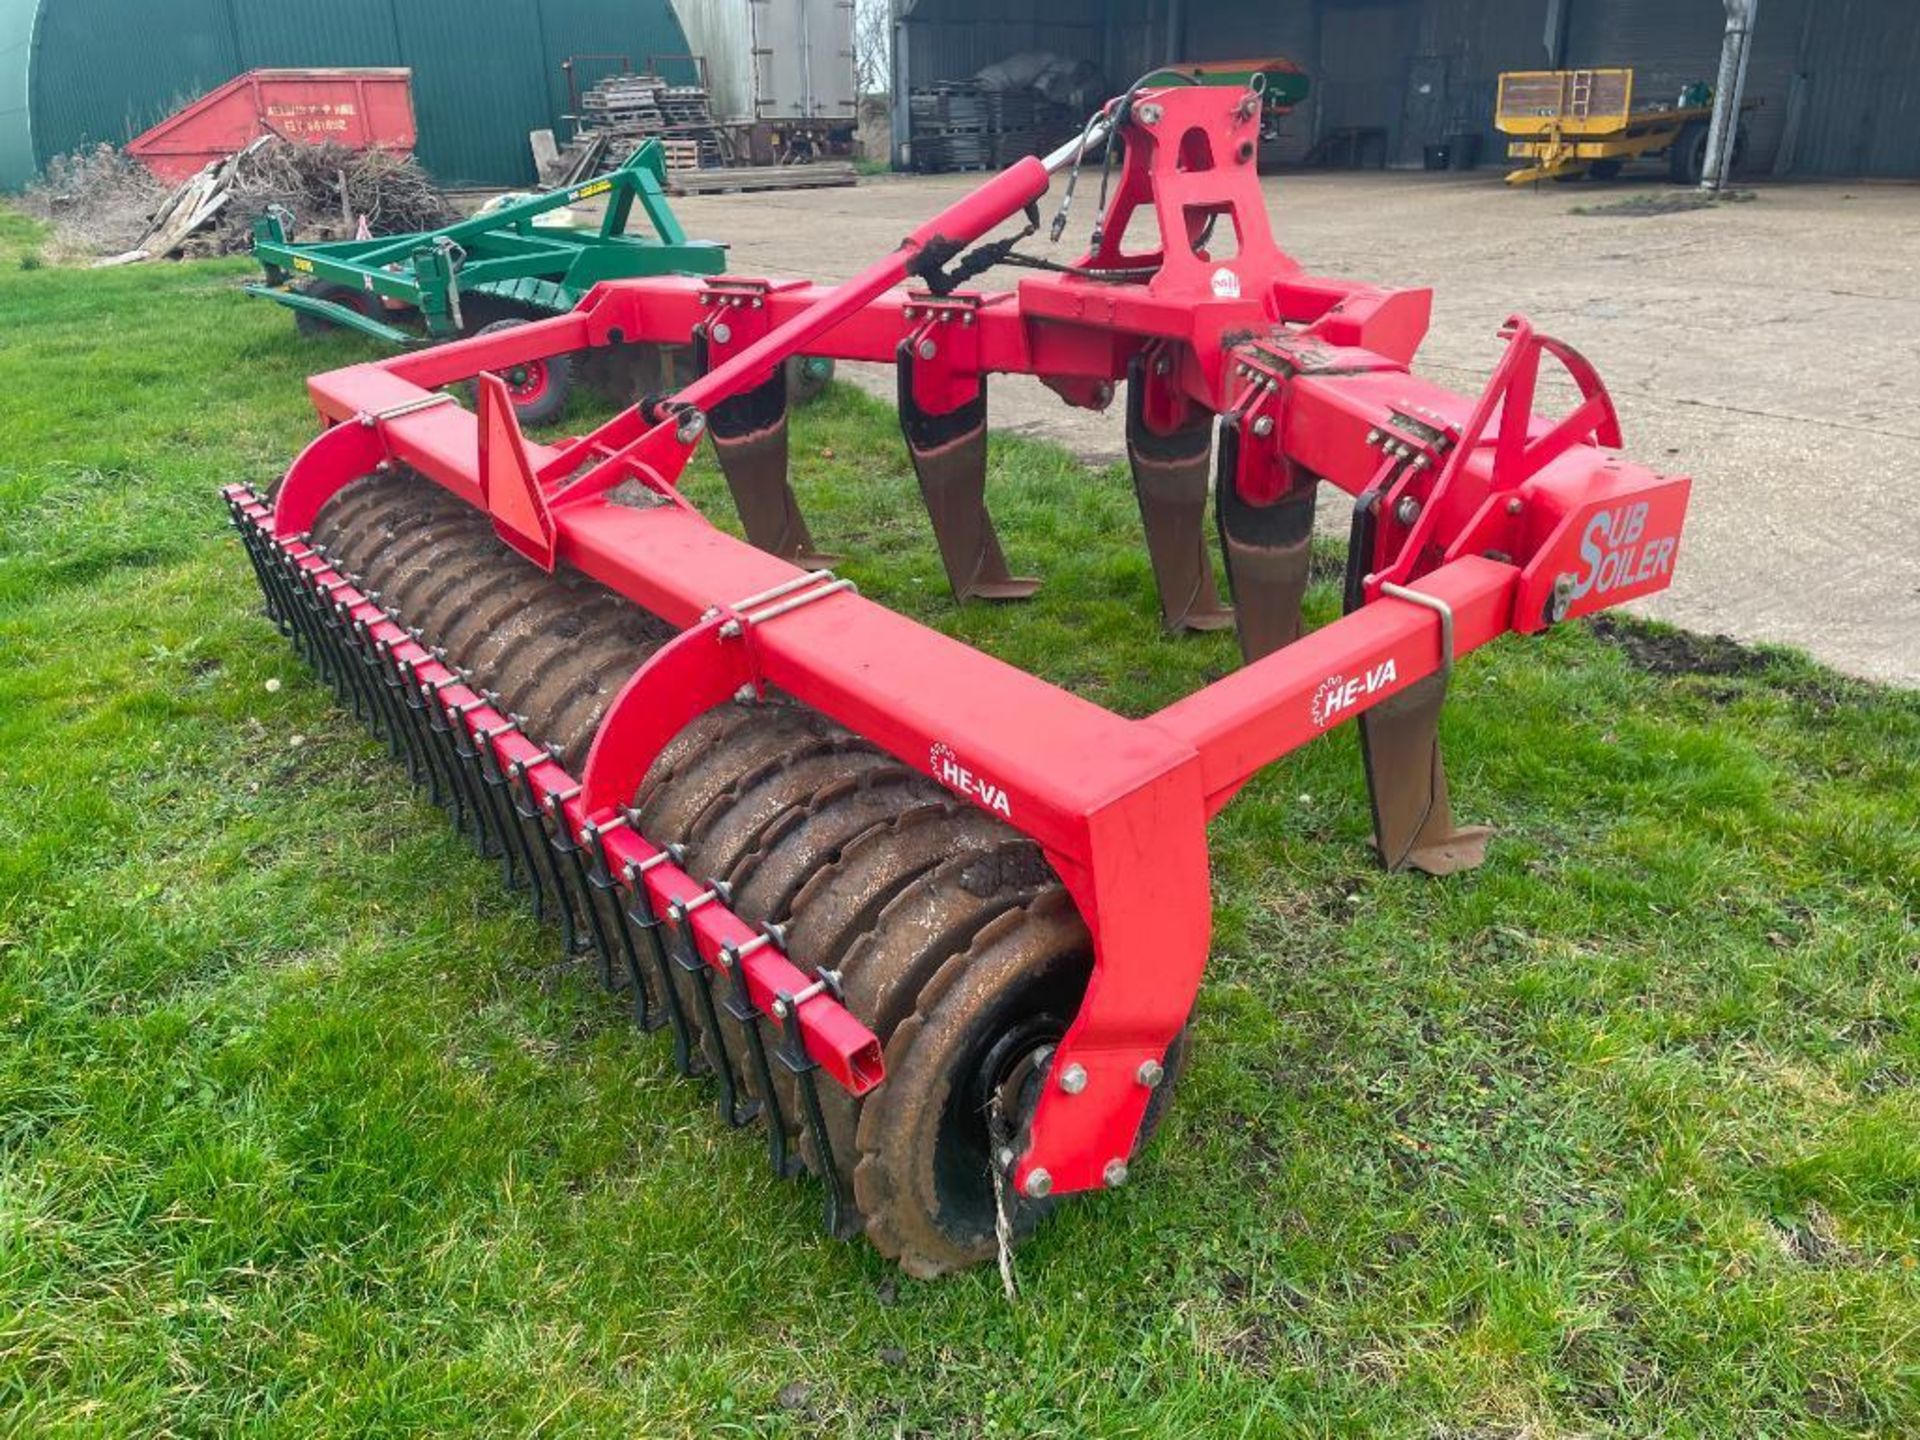 2014 HE-VA 5 leg subsoiler with hydraulic adjustable rear packer. Serial No: 30527 ​​​​​​​Manual in - Image 6 of 14